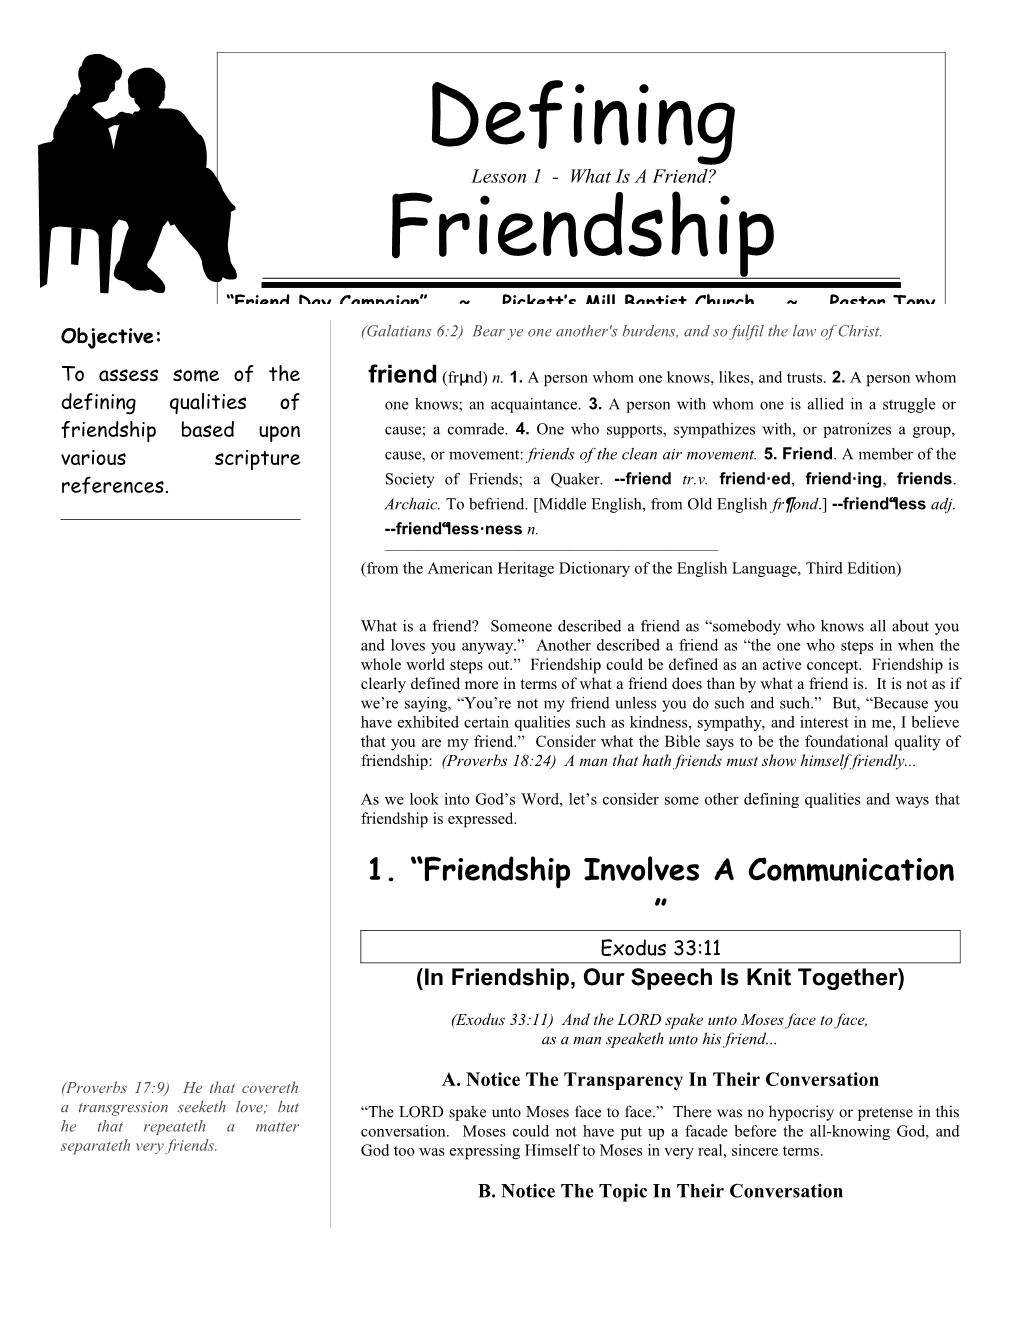 To Assess Some of the Defining Qualities of Friendship Based Upon Various Scripture References